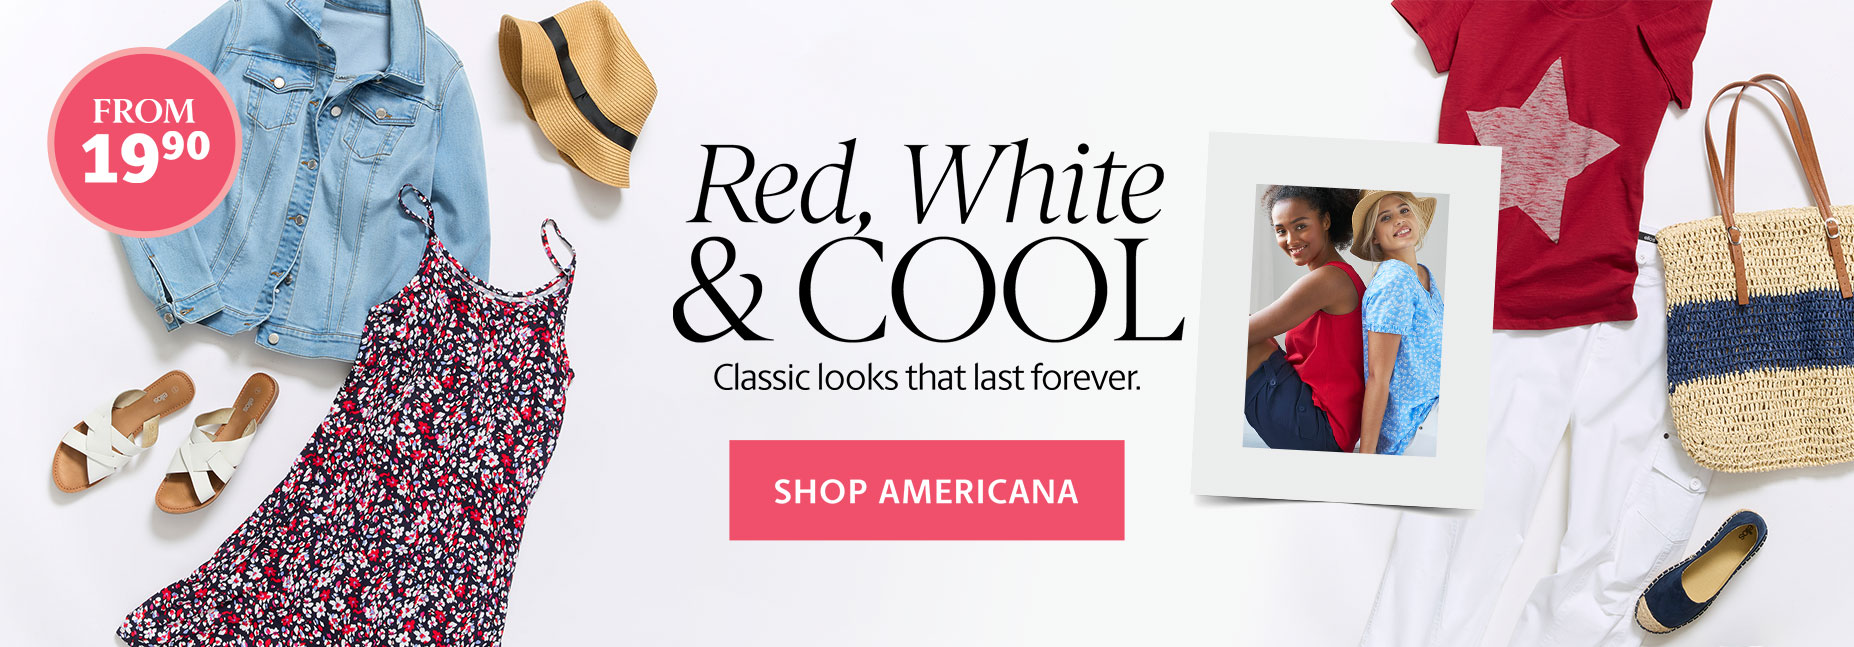 Red, White & Cool - shop Americana